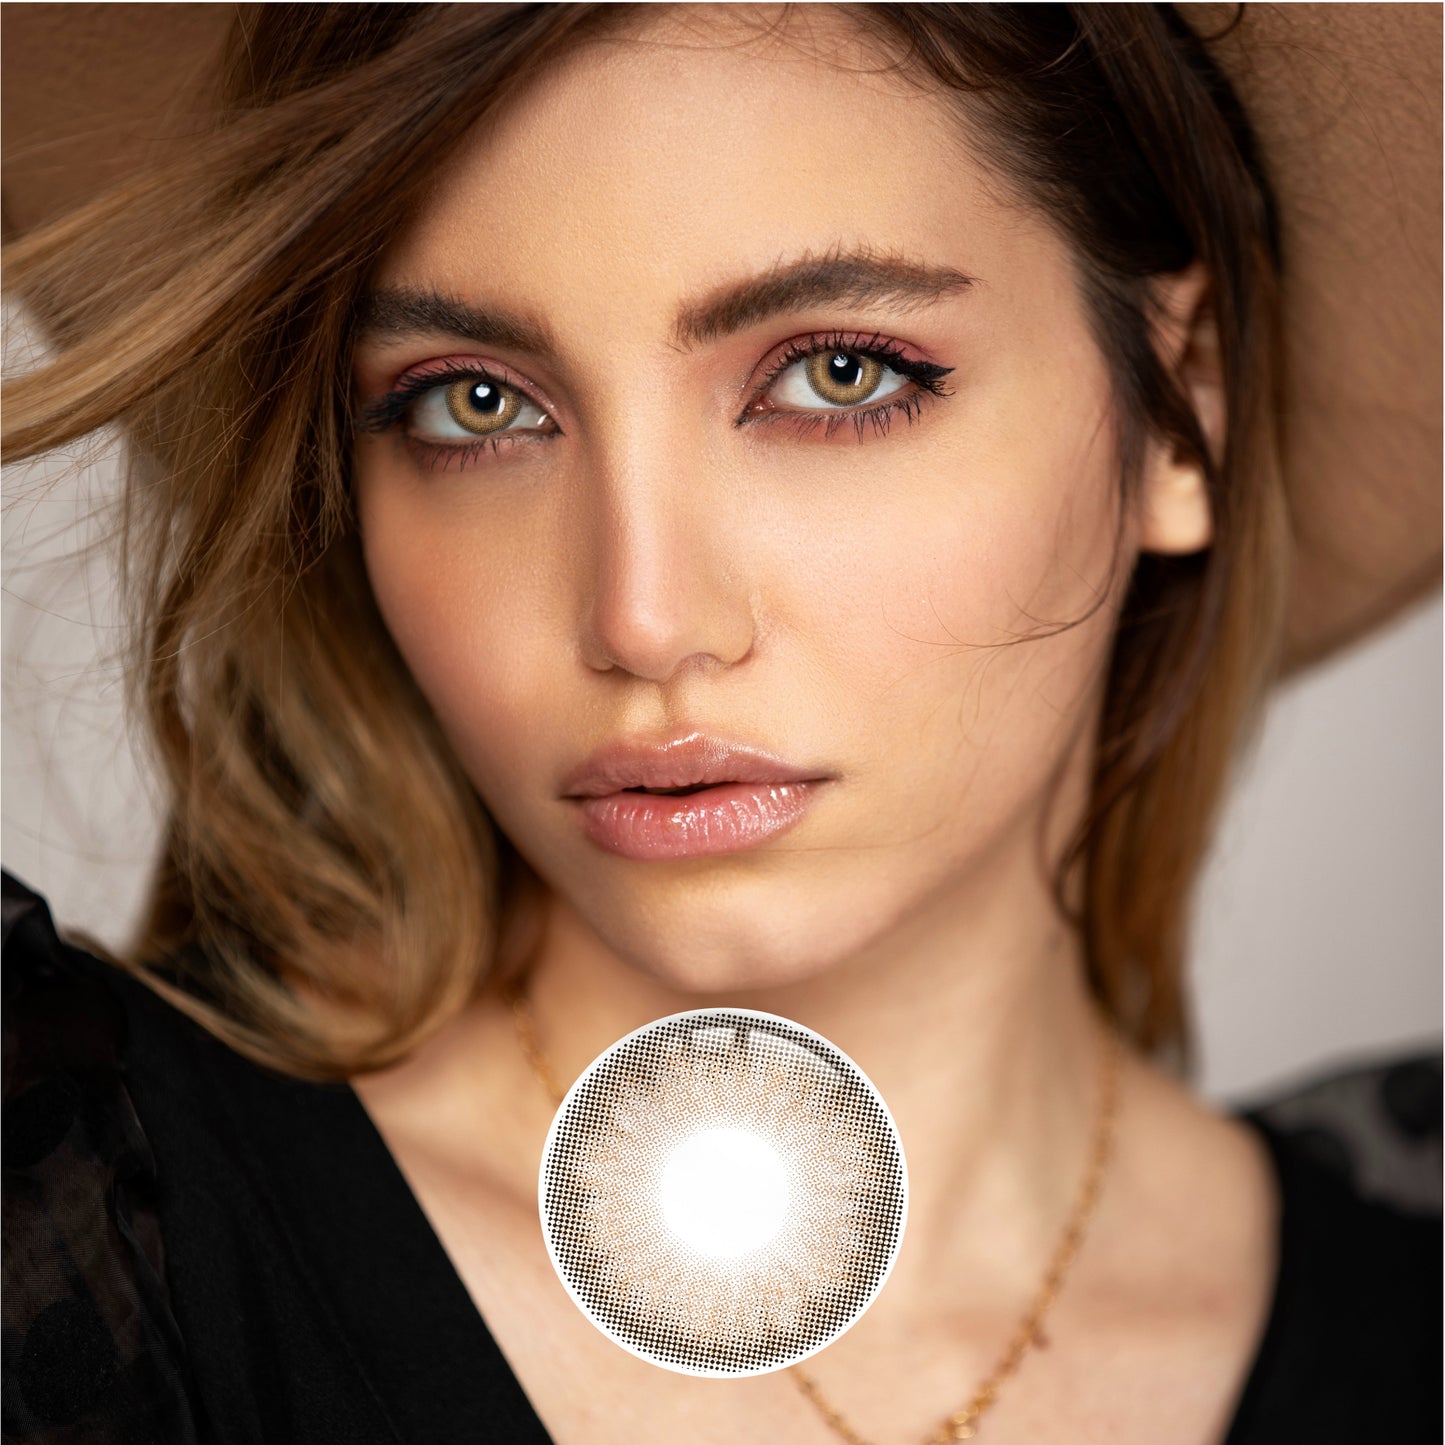 1pcs FDA Certificate Eyes Colorful Contact Lenses - Fascinated Brown